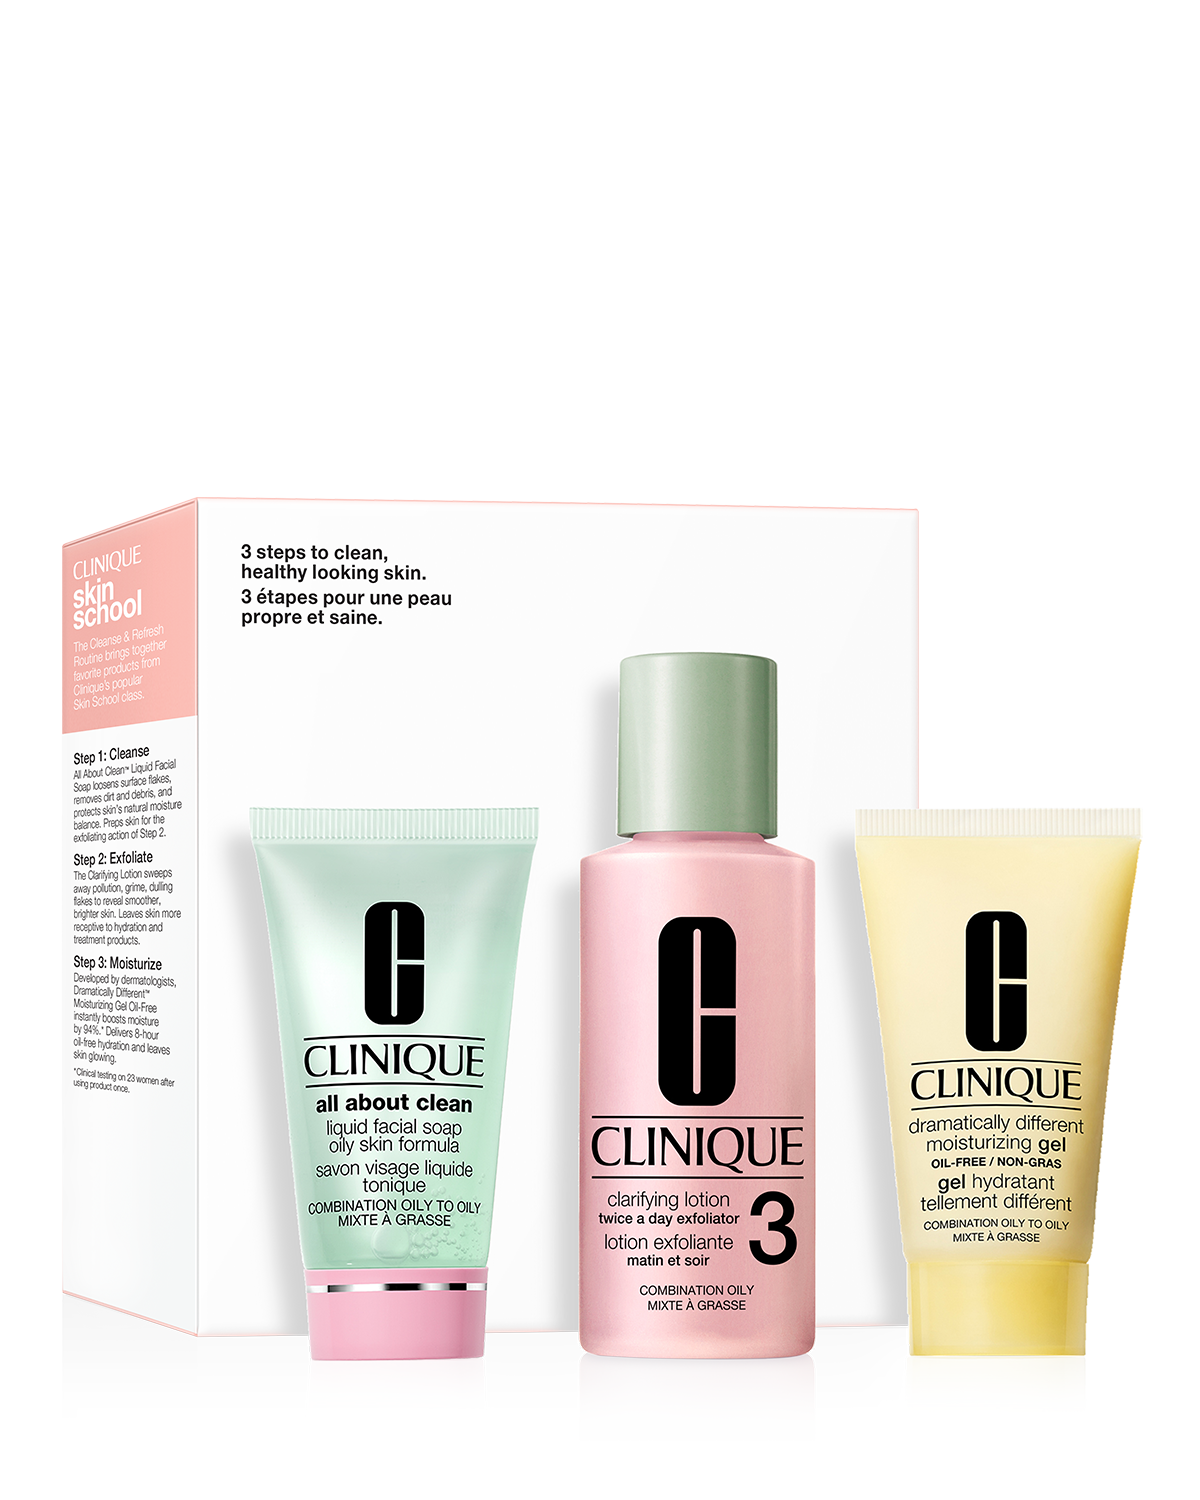 Skin School Supplies: Cleanser Refresher Course for Combination Oily